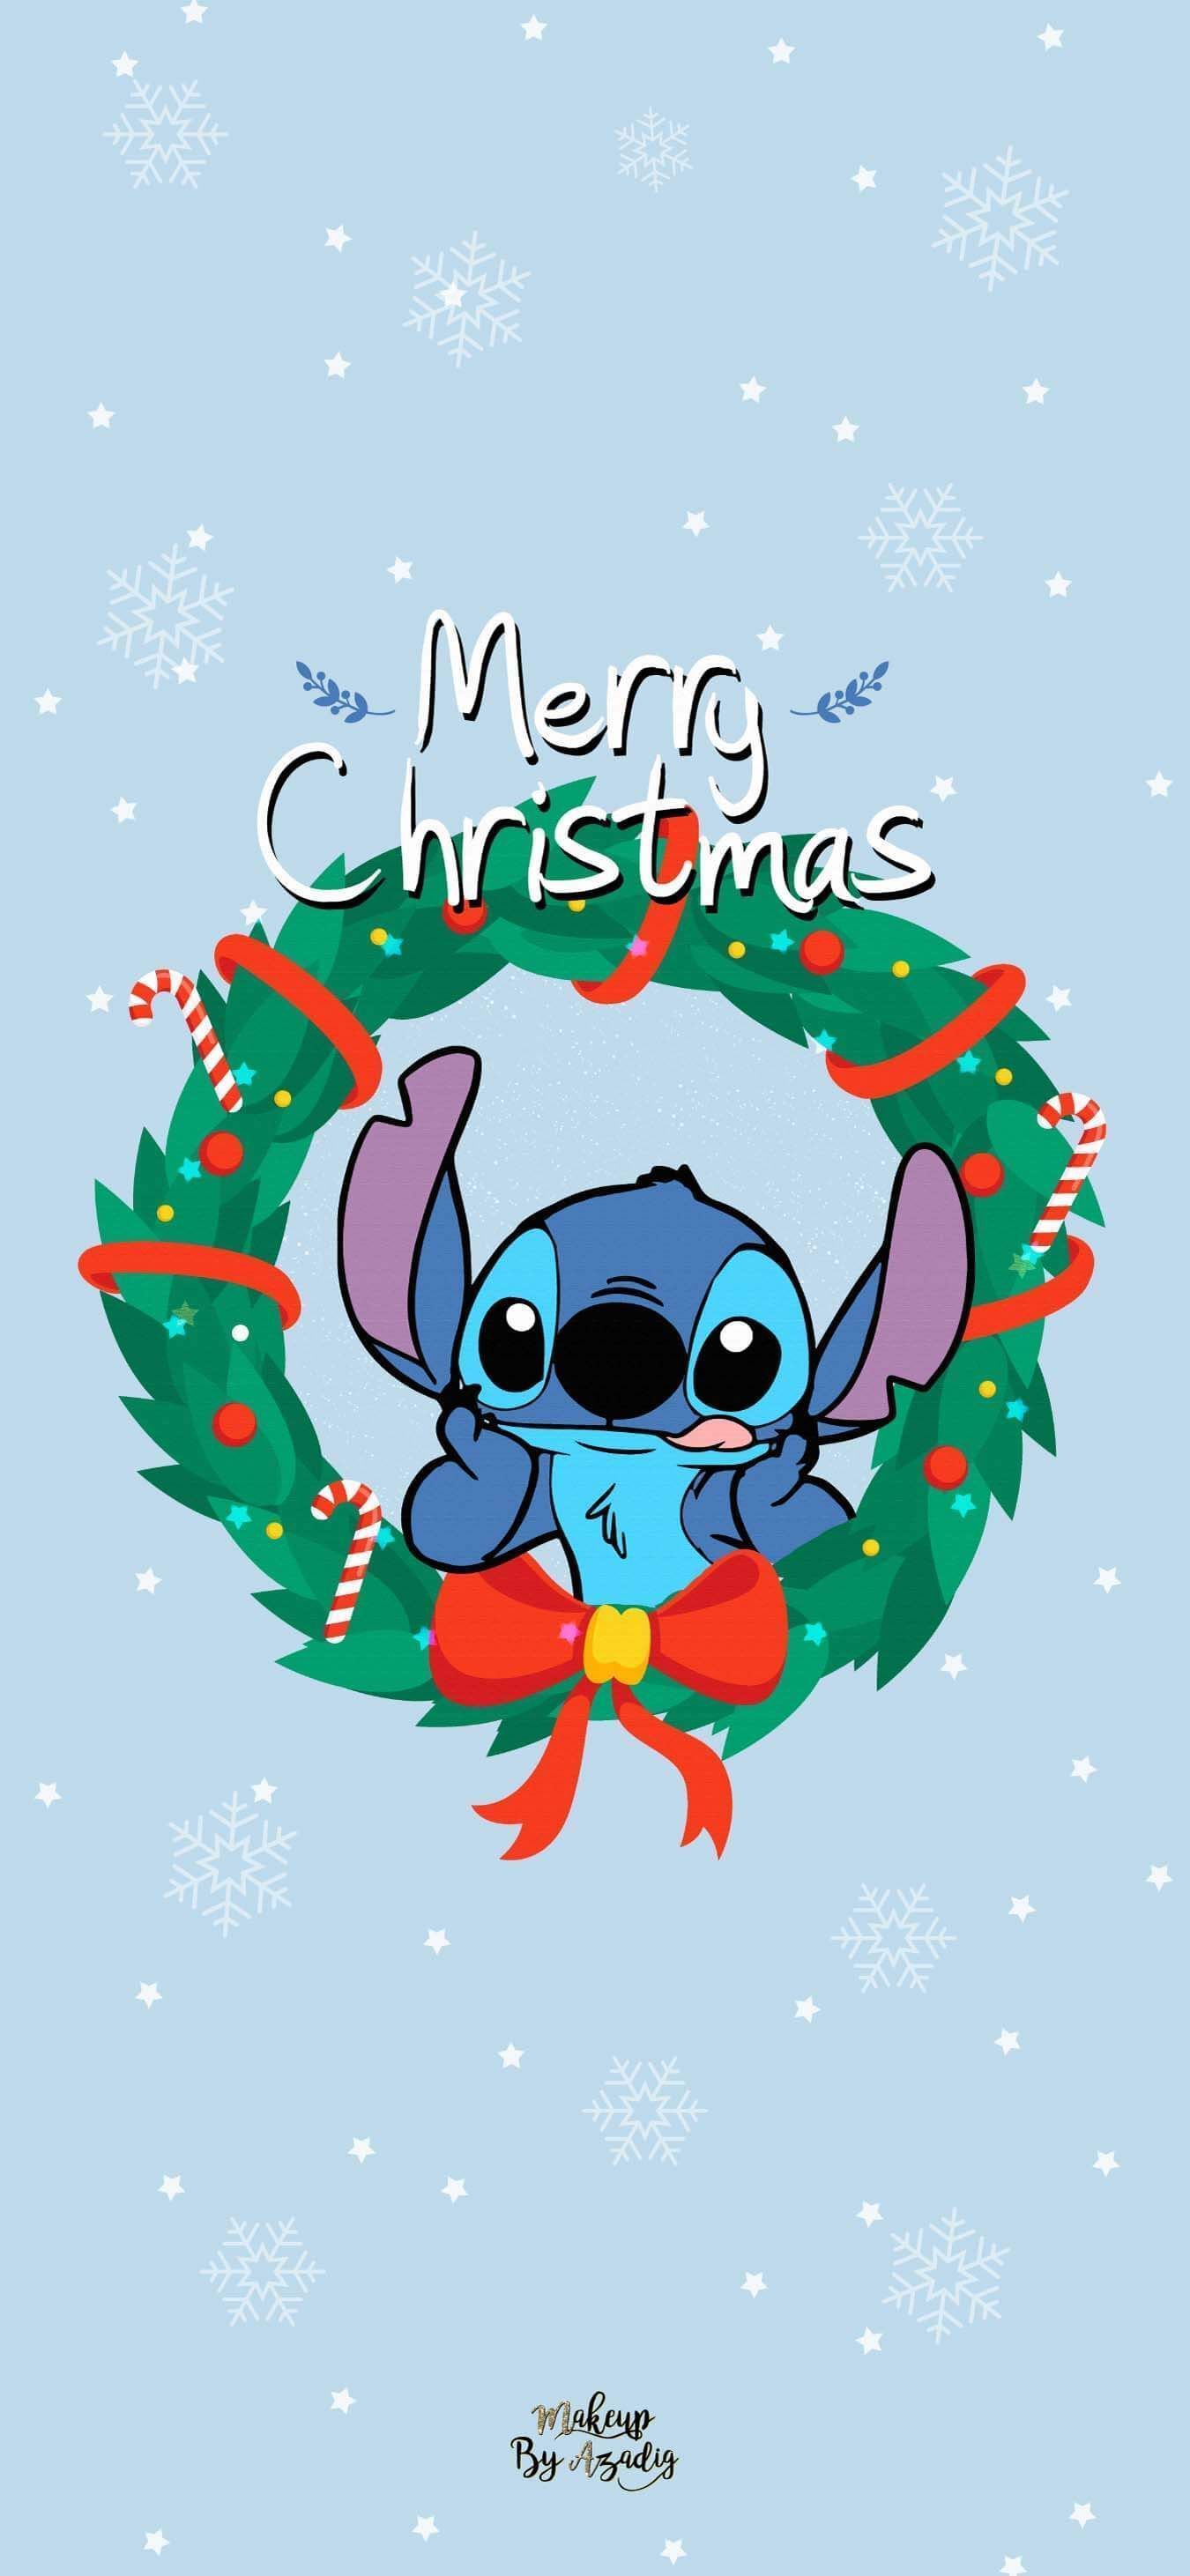 Cute Wallpaper iPhone Disney Stitch for Your iPhone. Wallpaper iphone christmas, Cute christmas wallpaper, Christmas wallpaper iphone cute